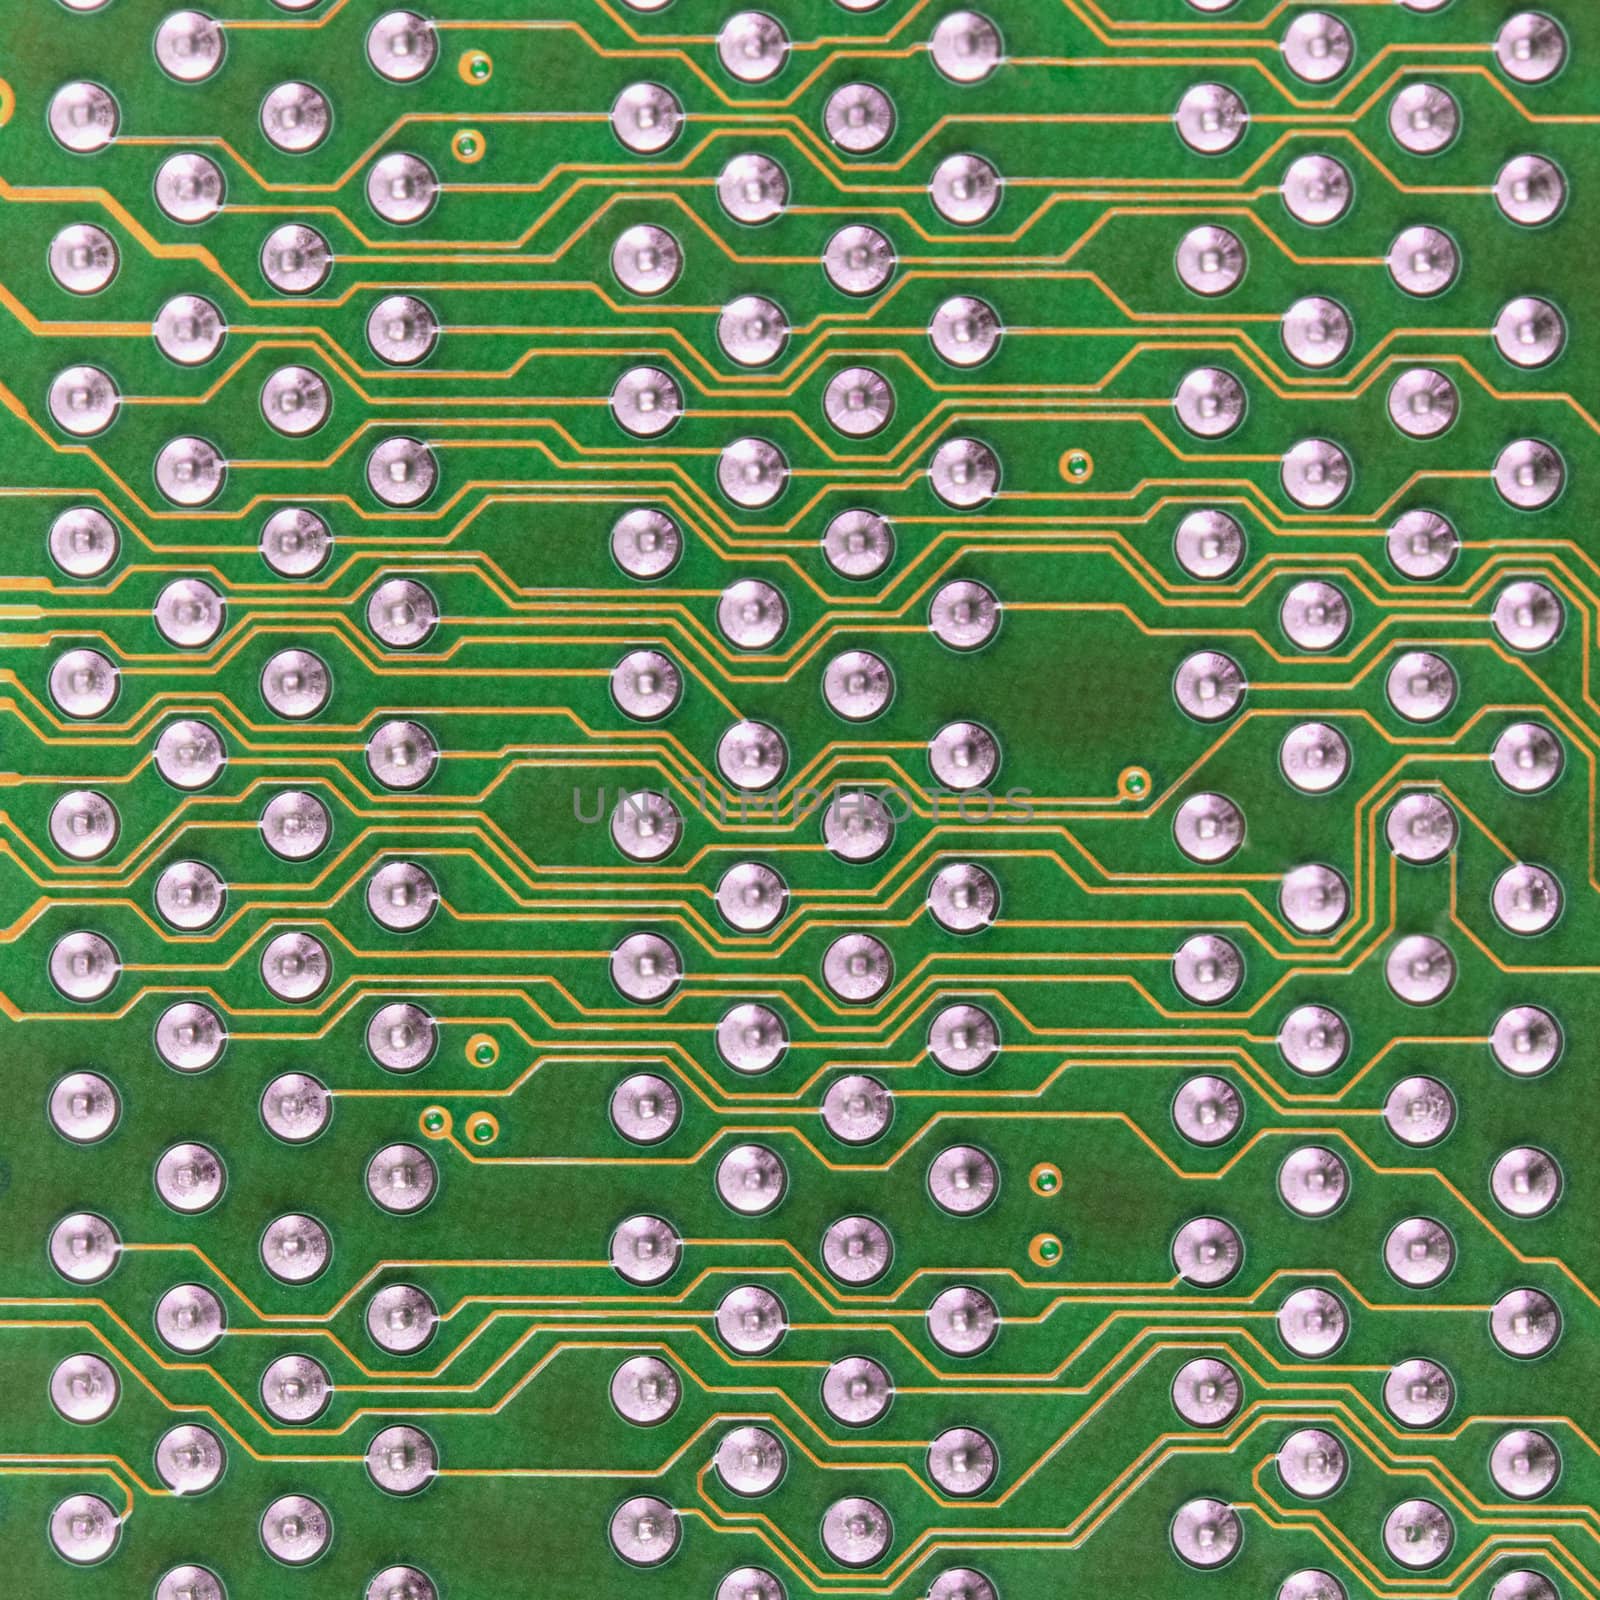 Circuit board electronic green square pattern by pzaxe